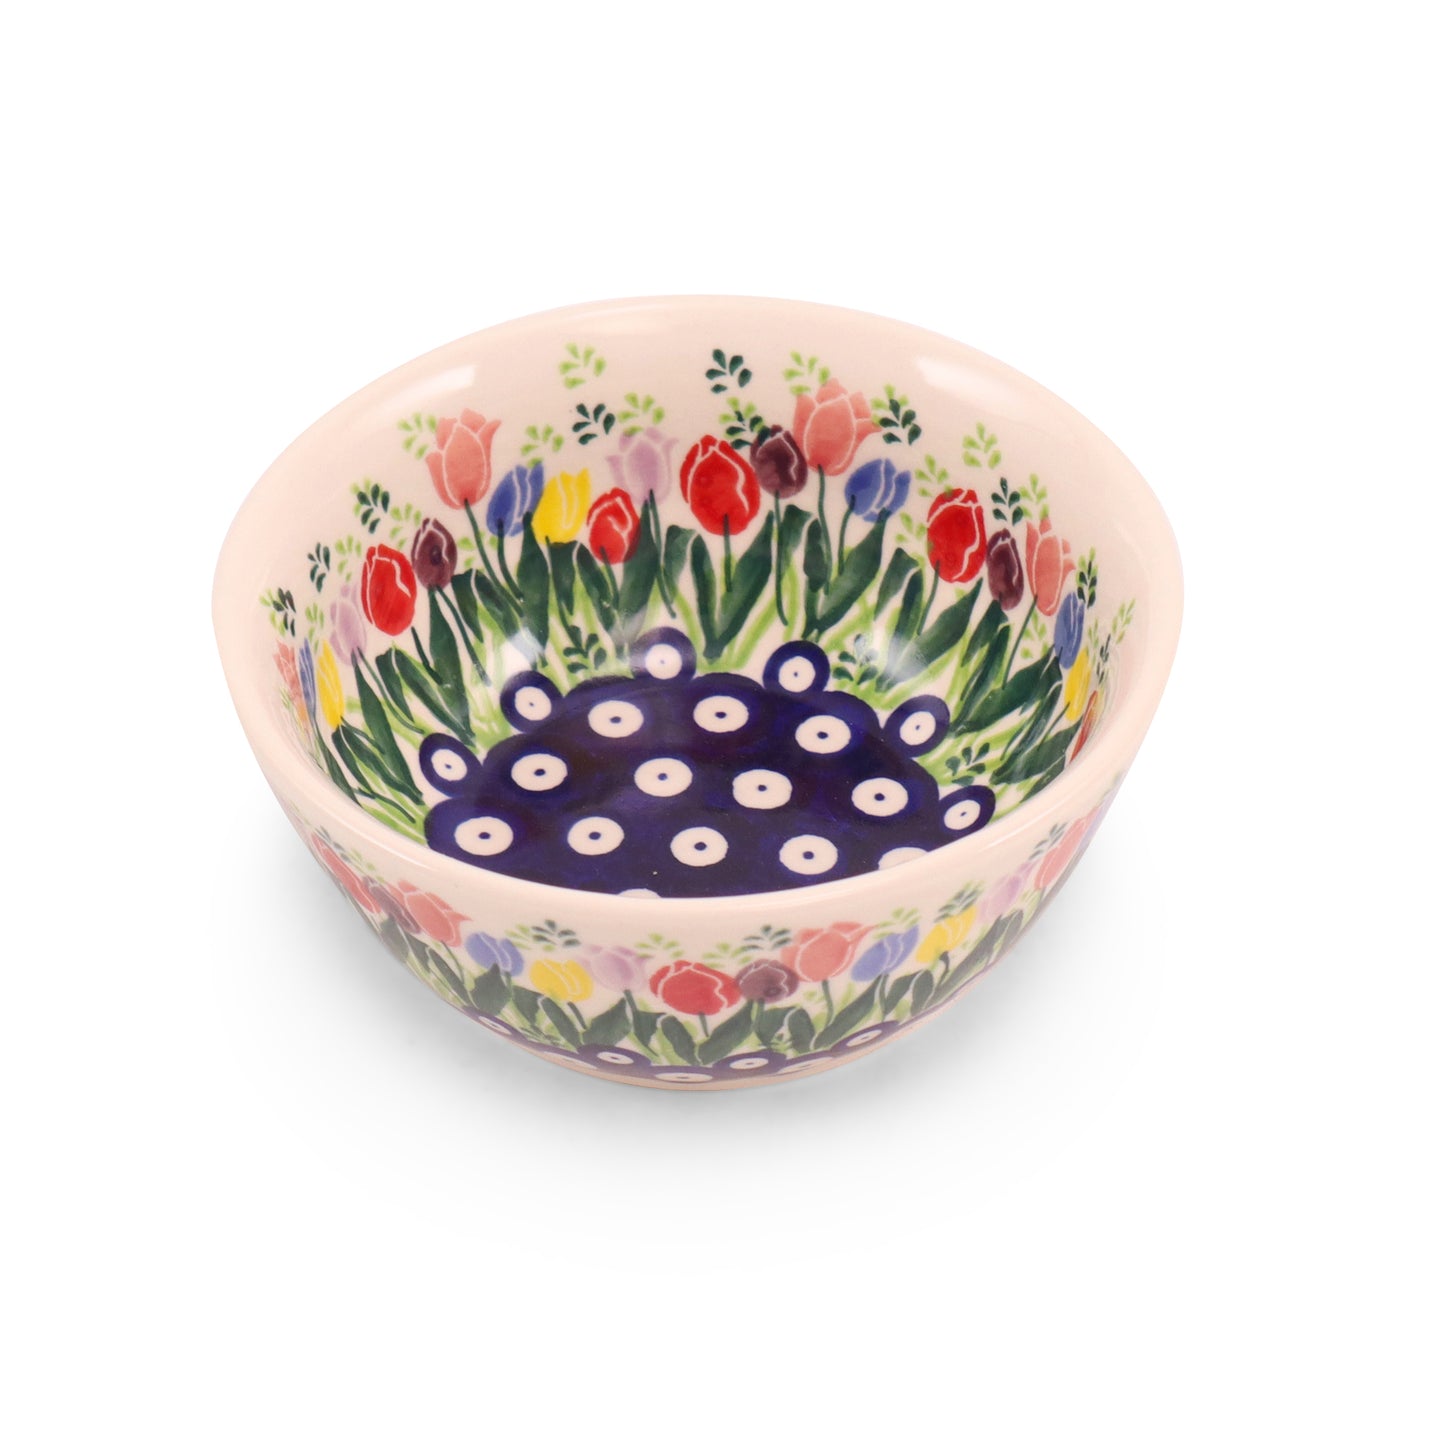 6" Cereal Bowl. Pattern: Tulip Time